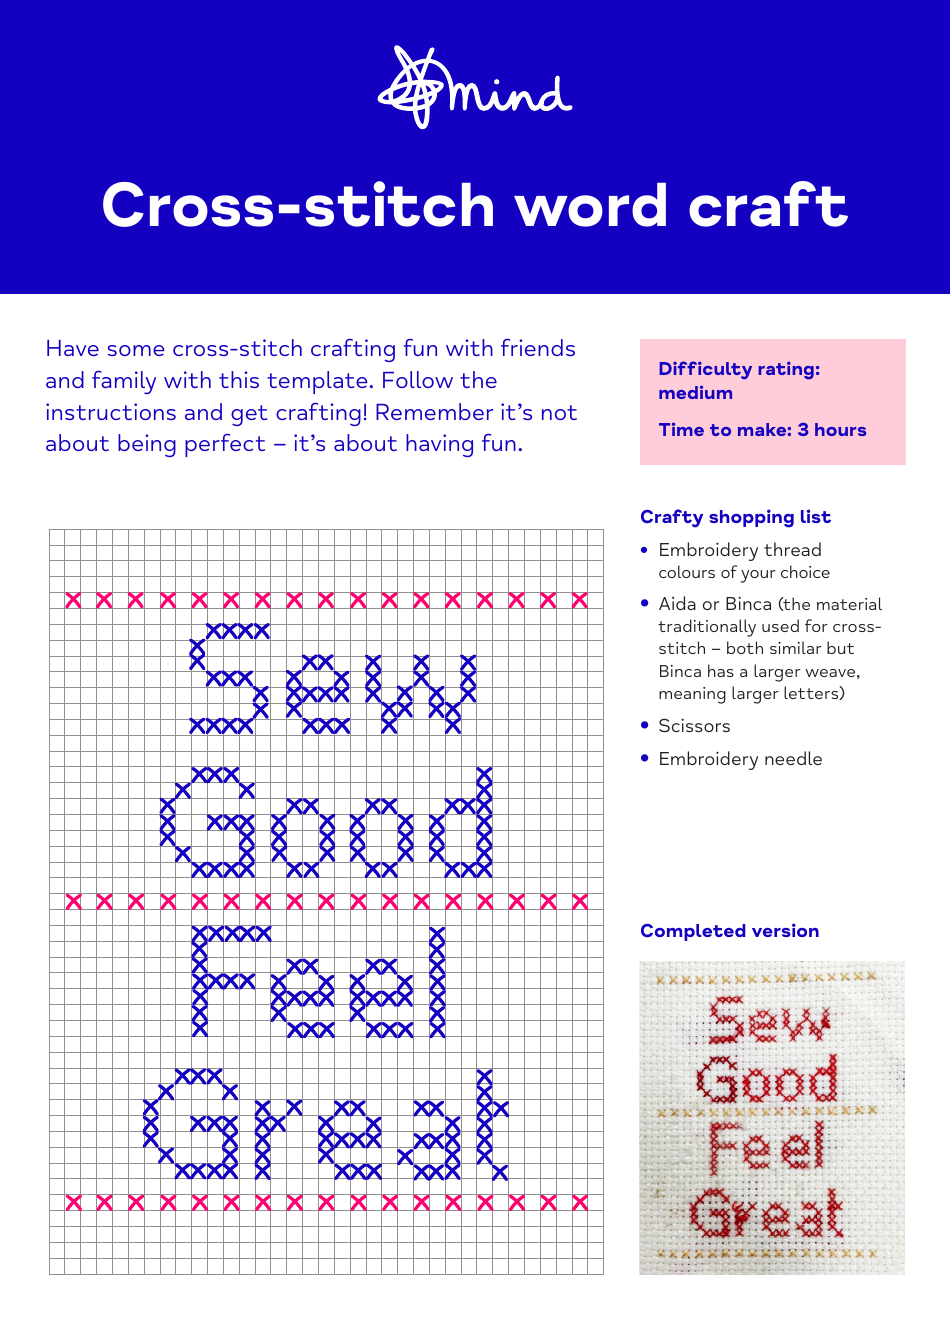 Cross-stitch Word Craft Pattern - Beautiful Floral Design with DMC Embroidery FeNmirth